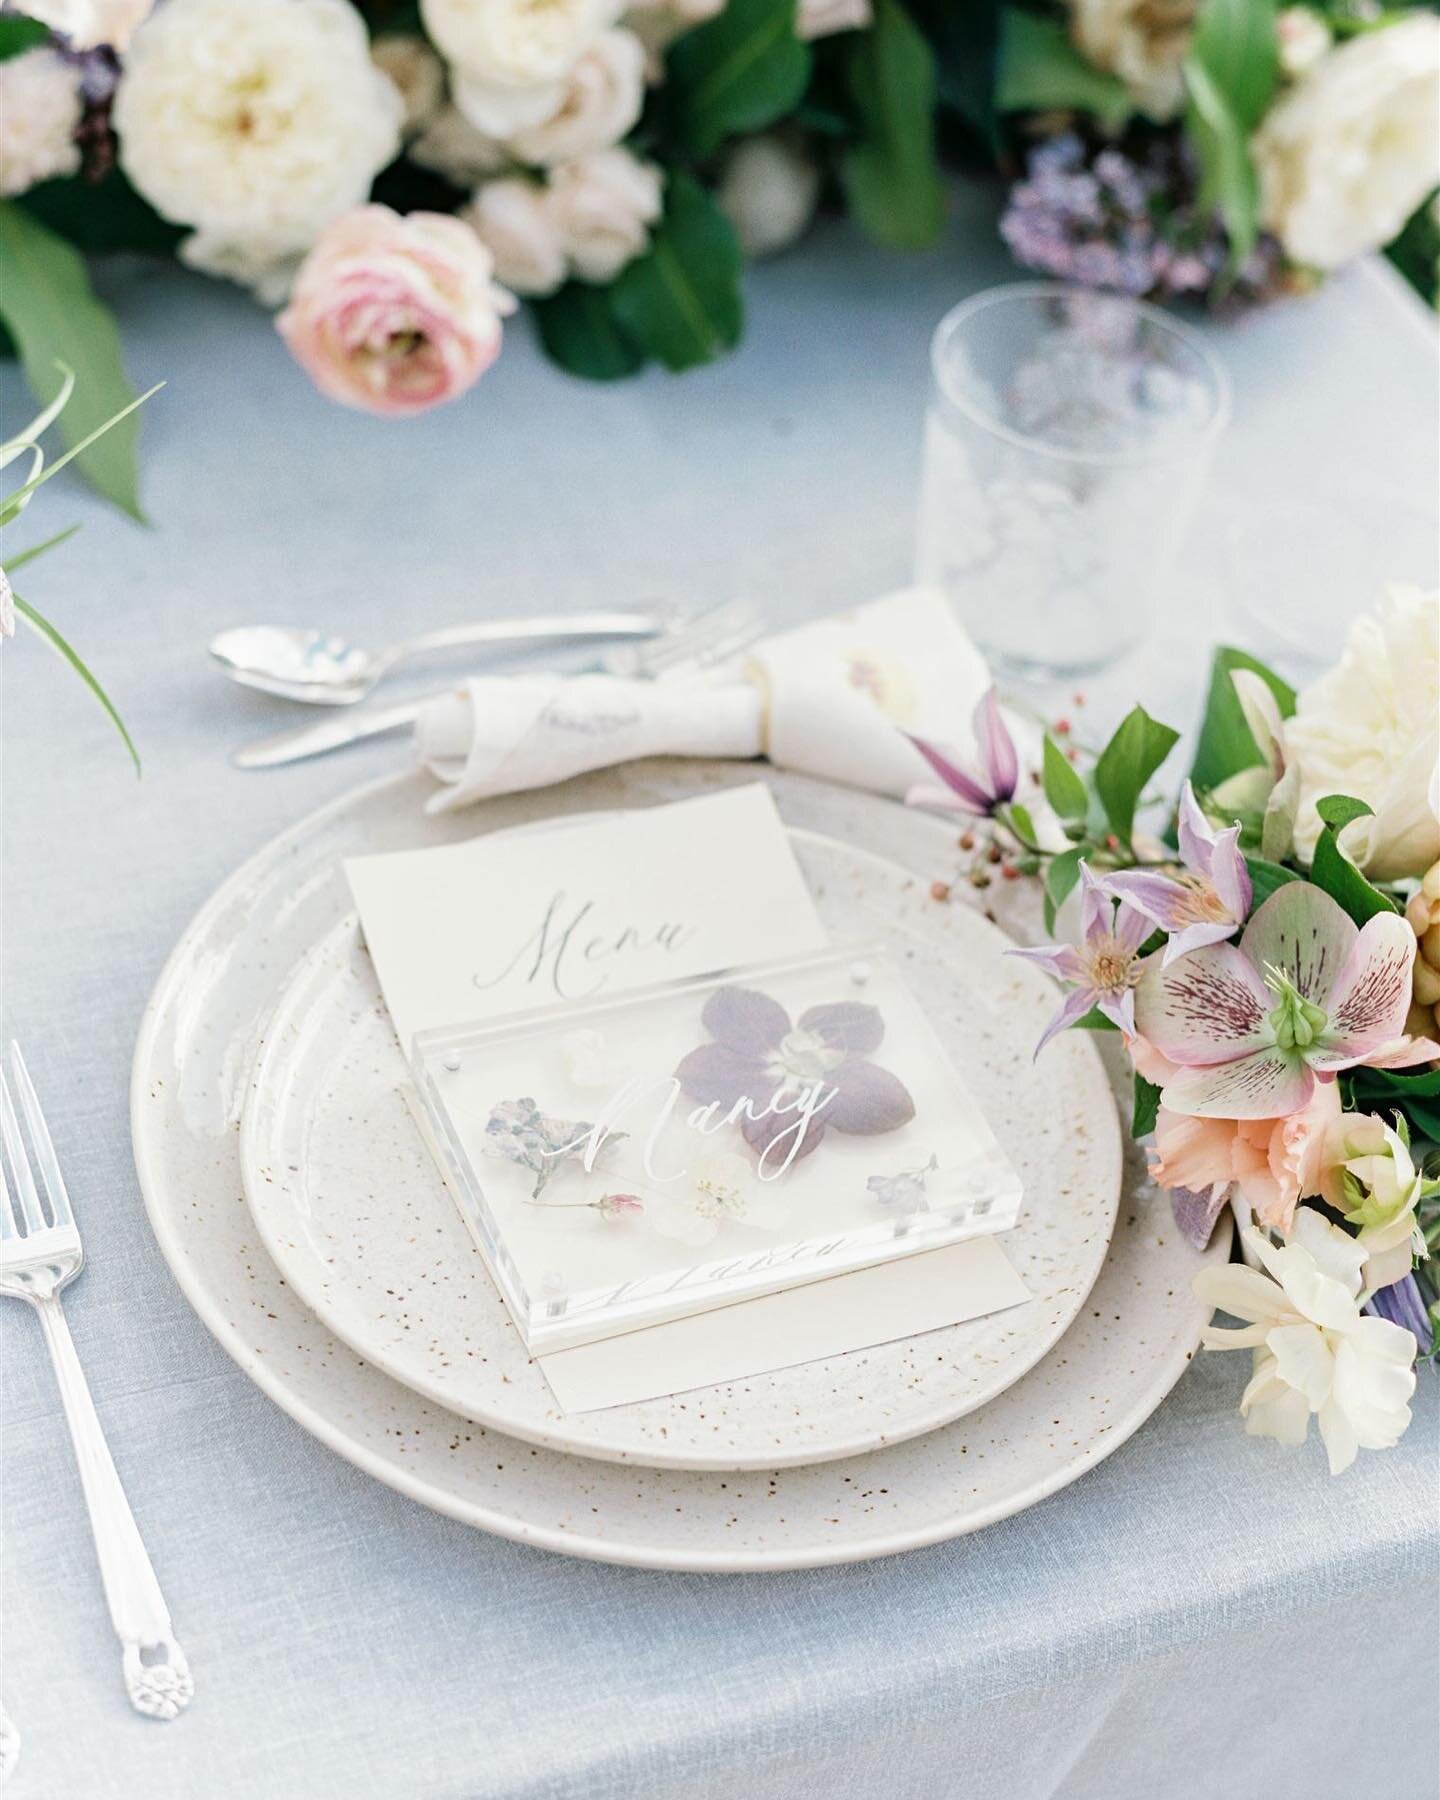 This classic and elegant garden soiree featured our Sand Dinnerware, Victoria Cutlery and Ophelia Glassware. As featured in @martha_weddings 

Huge thanks to all of the amazing vendors who made this event possible!

Planning &amp; Design: @dani.sabba